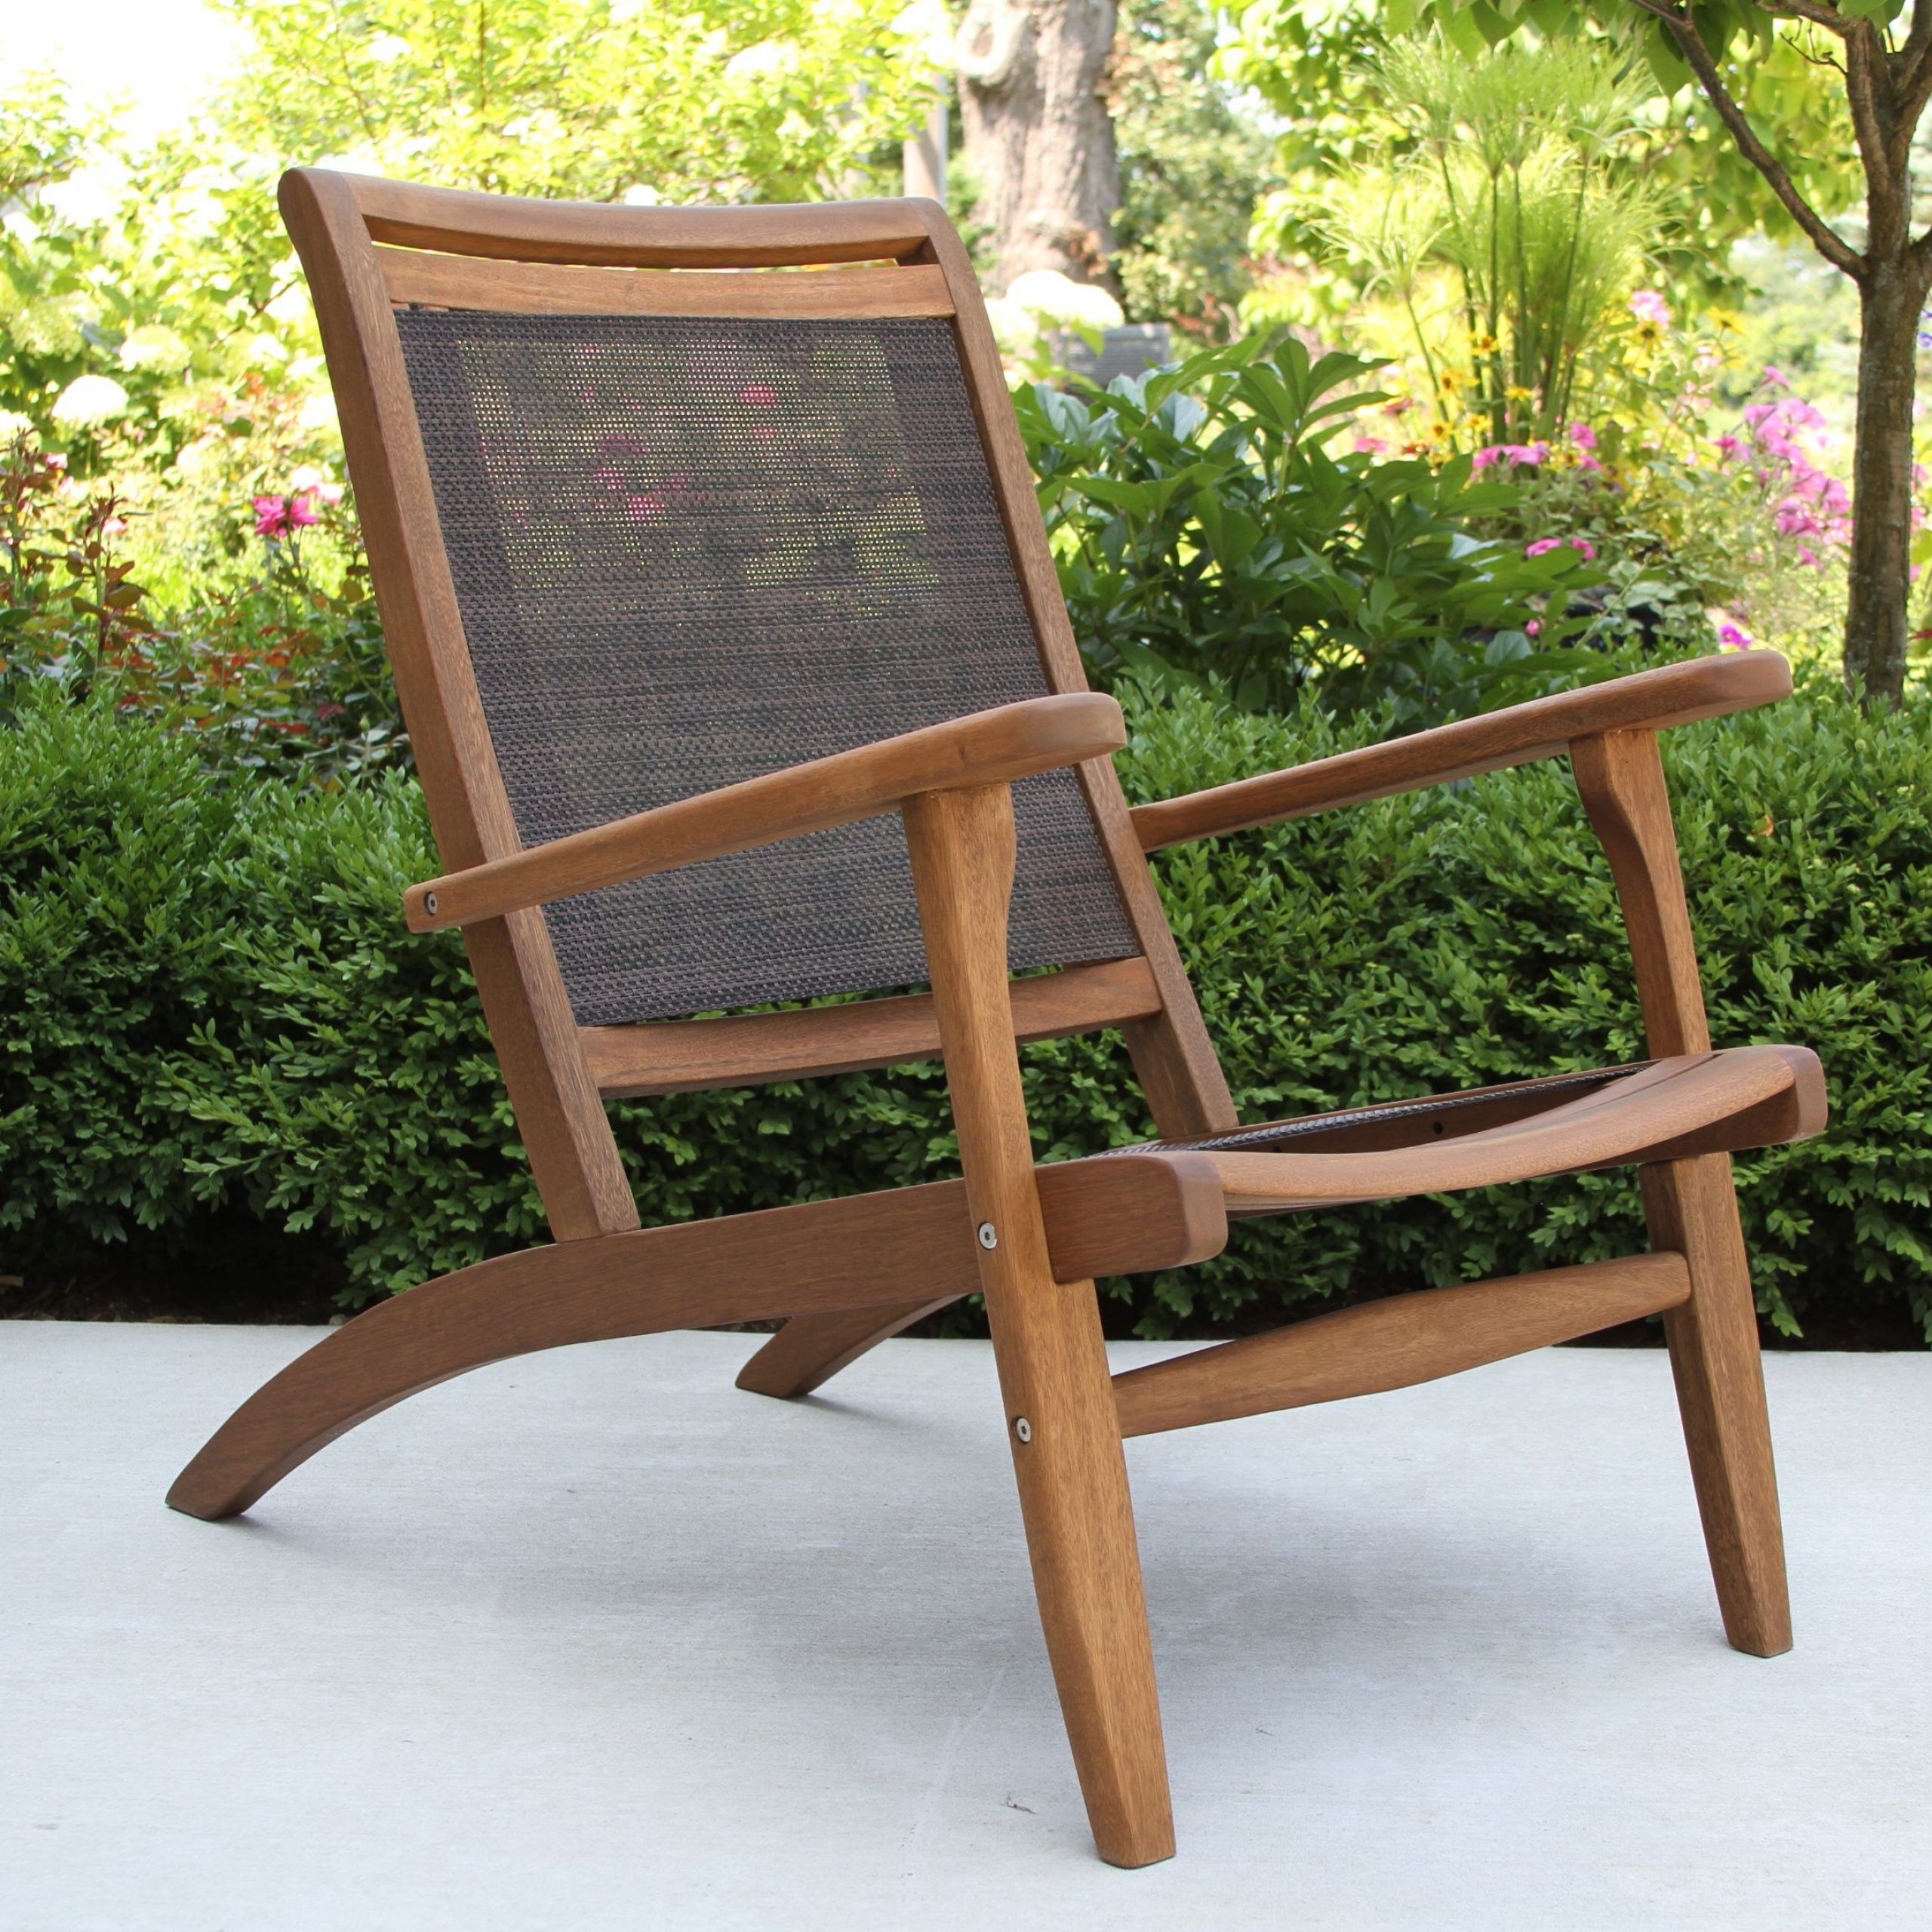 2019 Dark Brown Wood Outdoor Chairs Pertaining To Dark Brown Sling & Eucalyptus Wood Lounger For Decks, Patios, Porches (View 5 of 15)